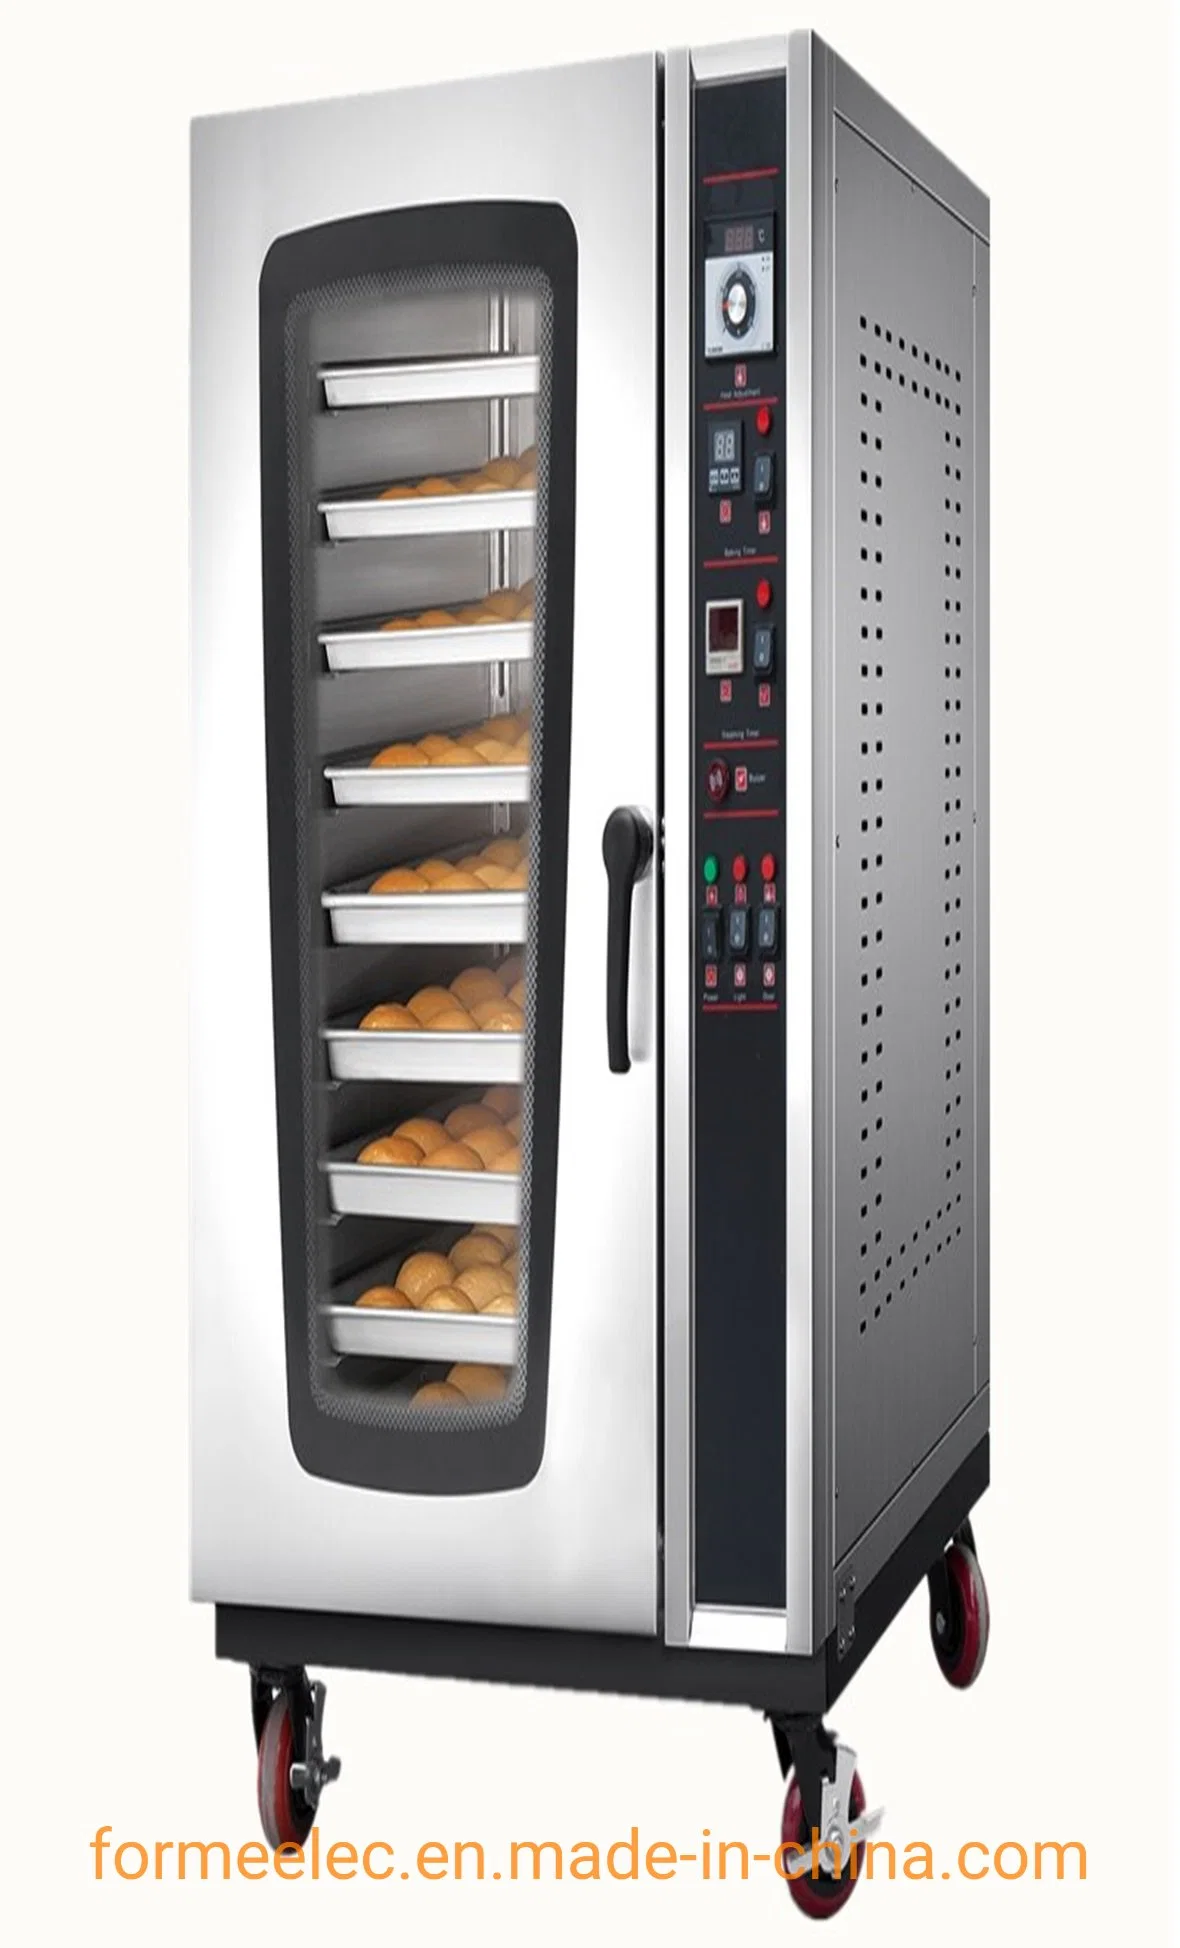 Bakery Machine Bread Baking Oven 8 Trays Hot Air Circulating Oven Electric Oven